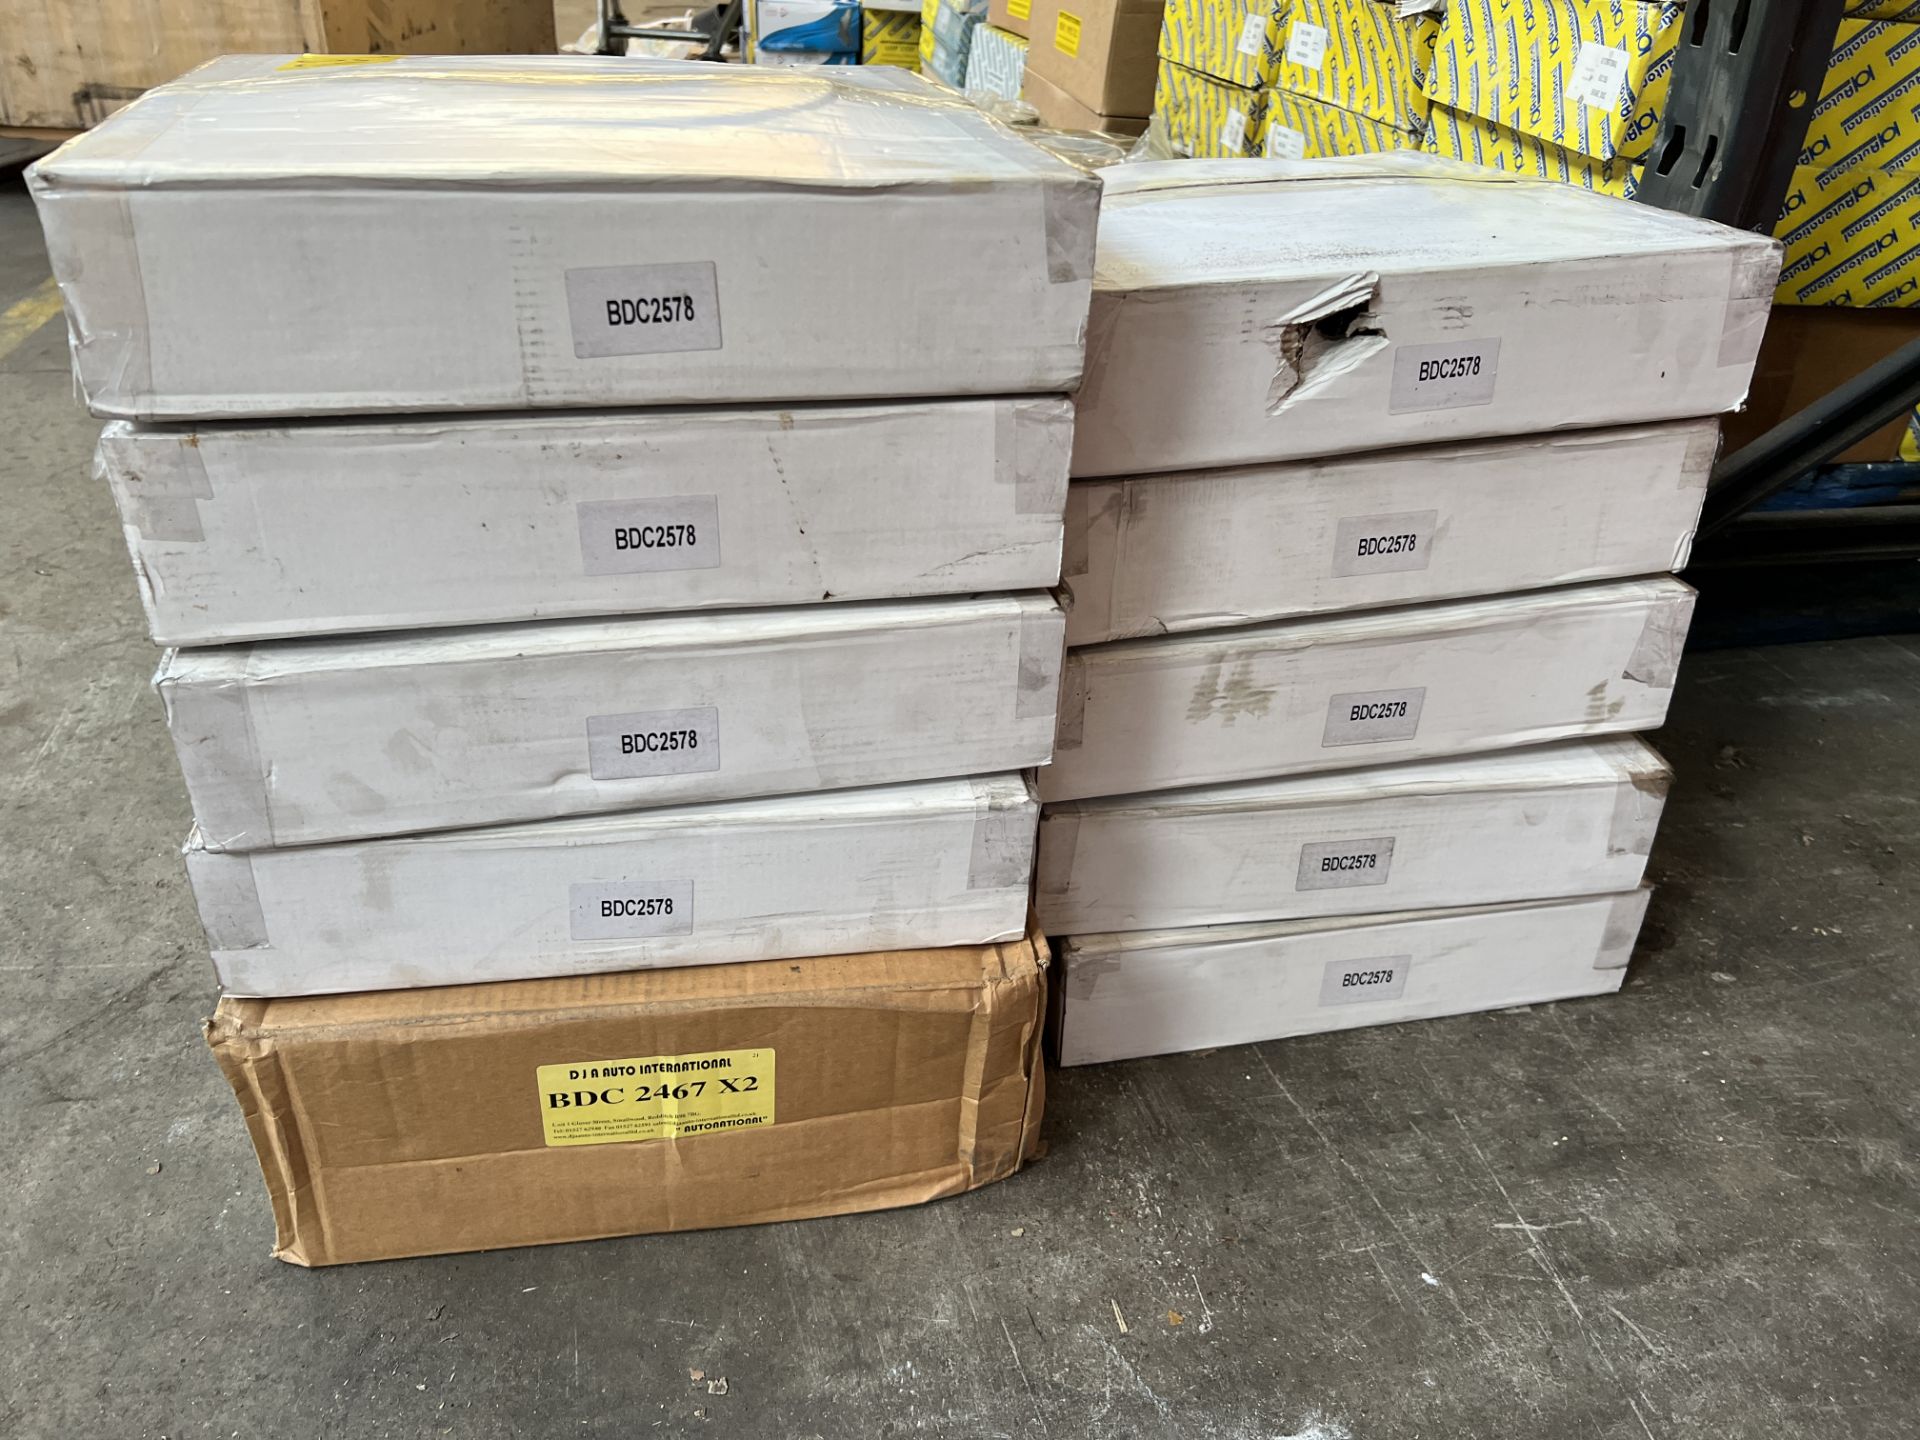 Large Quantity of Land Rover and Range Rover Components including Brake Disks, Drums, Pads, - Image 14 of 32